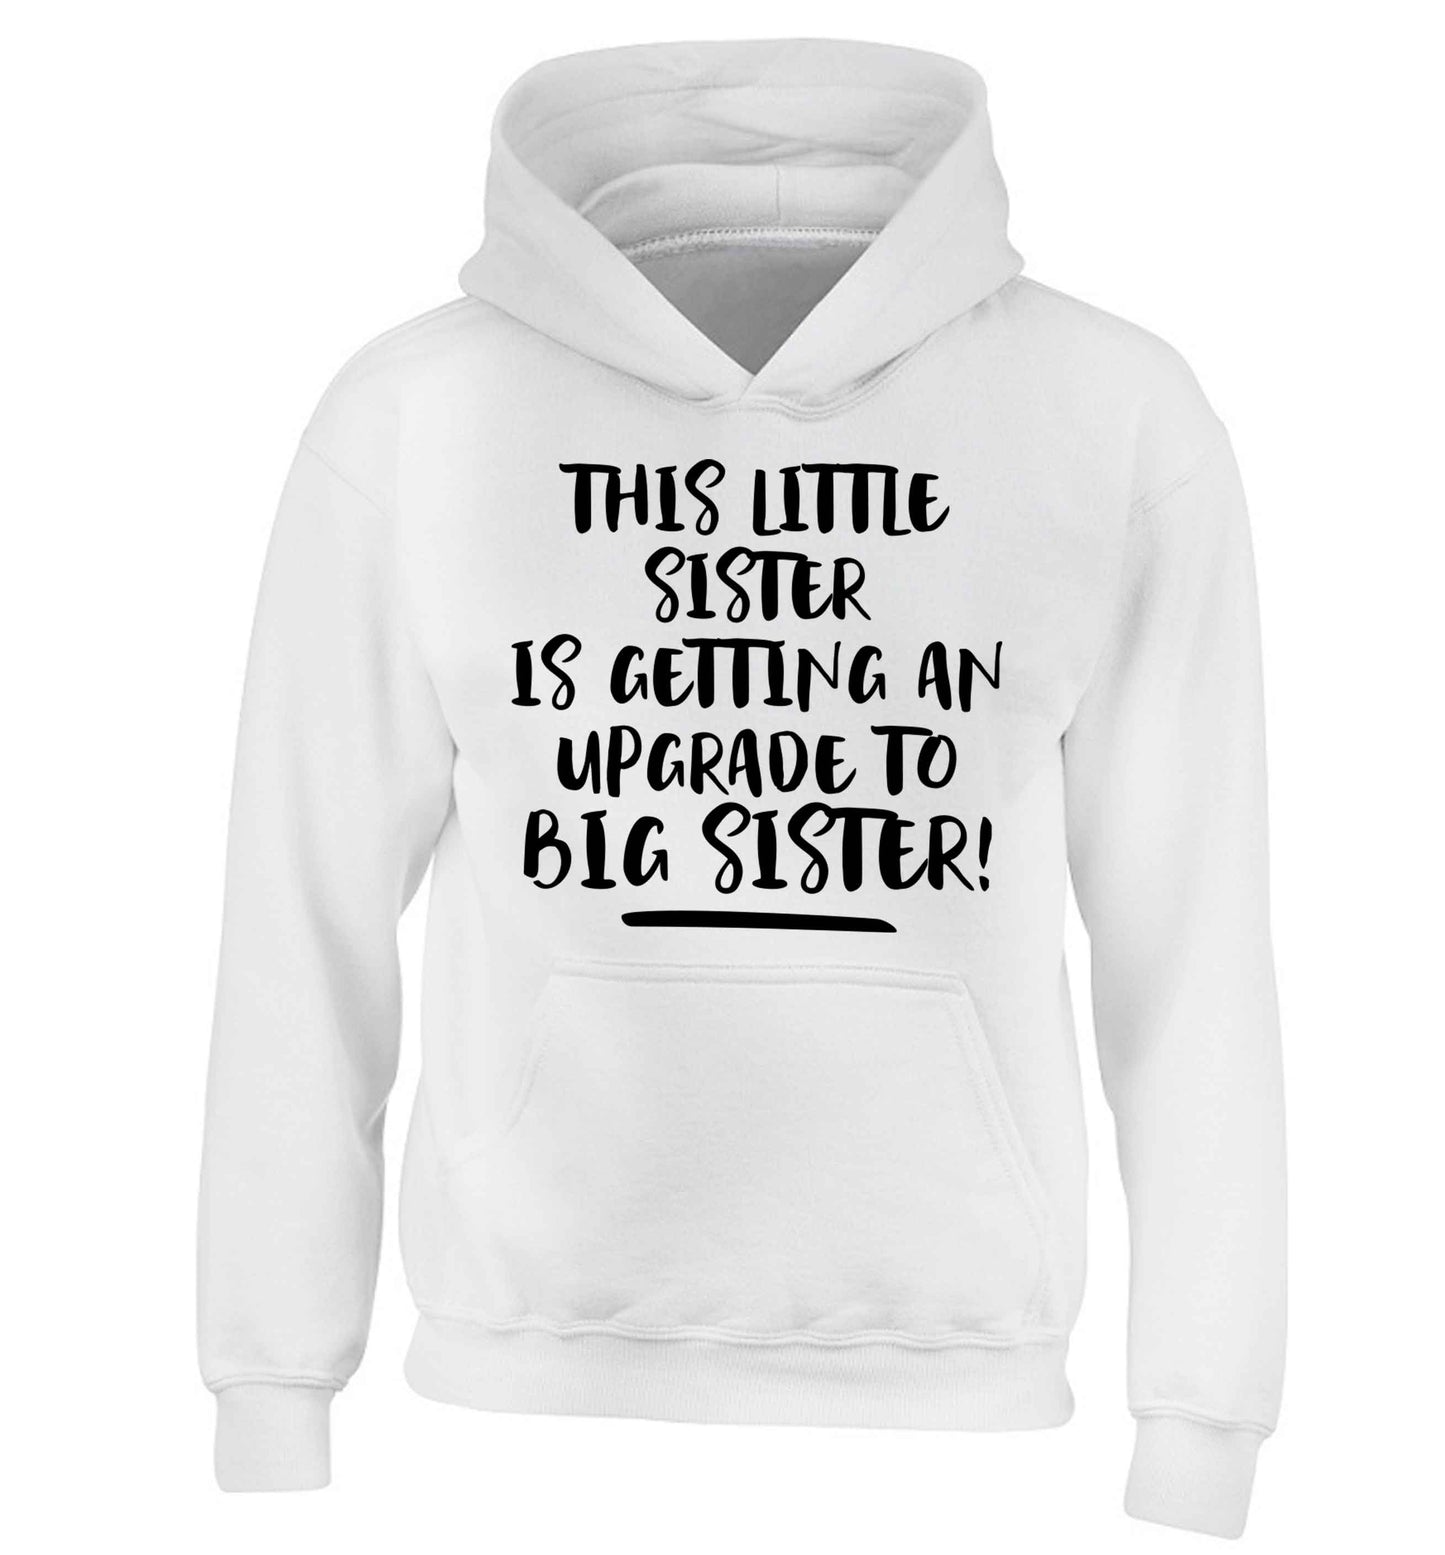 This little sister is getting an upgrade to big sister! children's white hoodie 12-13 Years